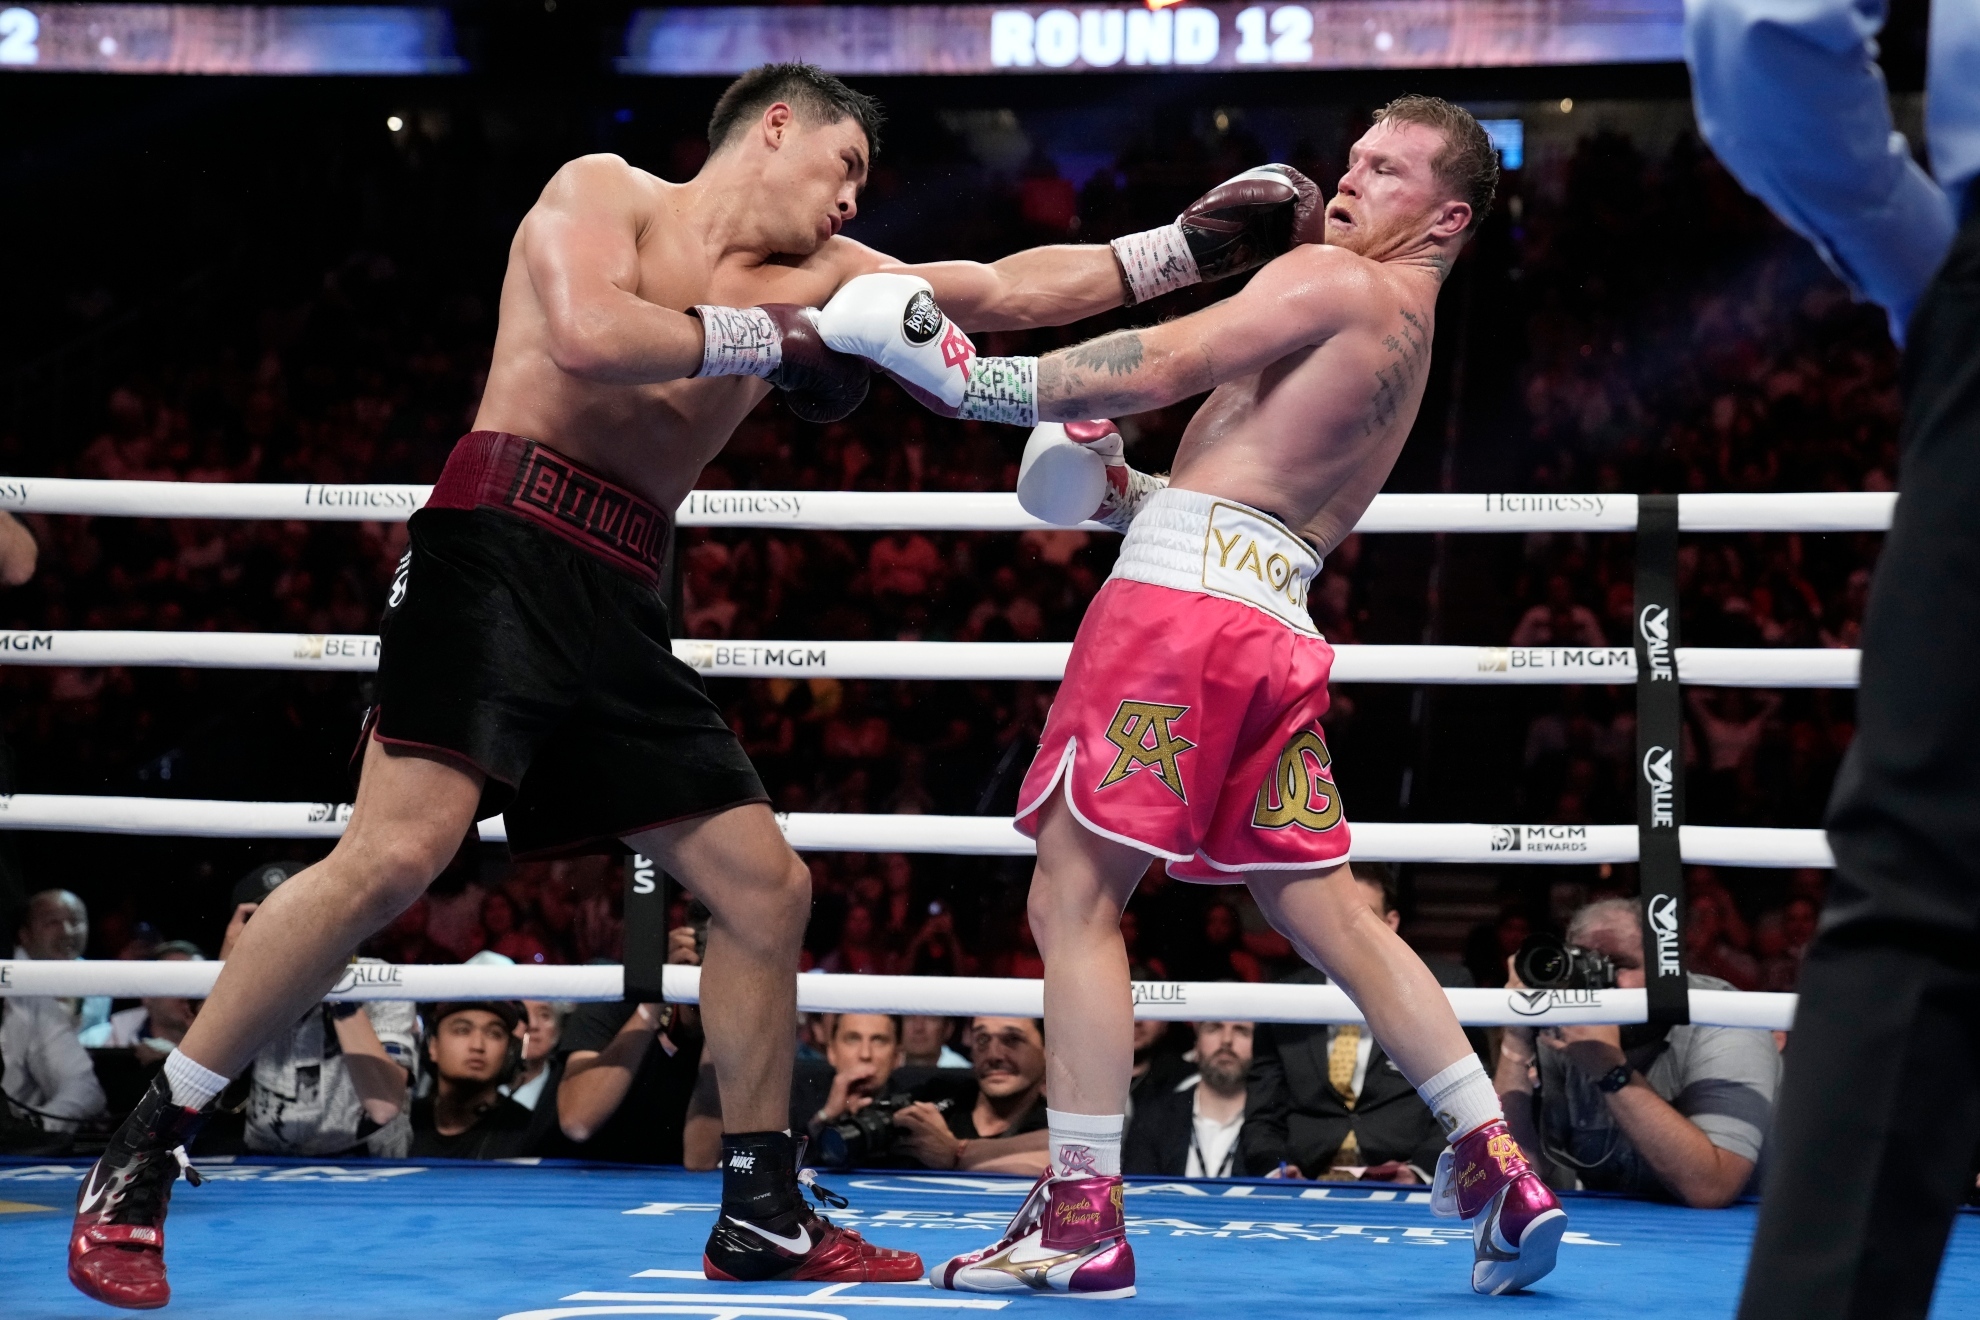 Bivol punching Canelo during their fight.